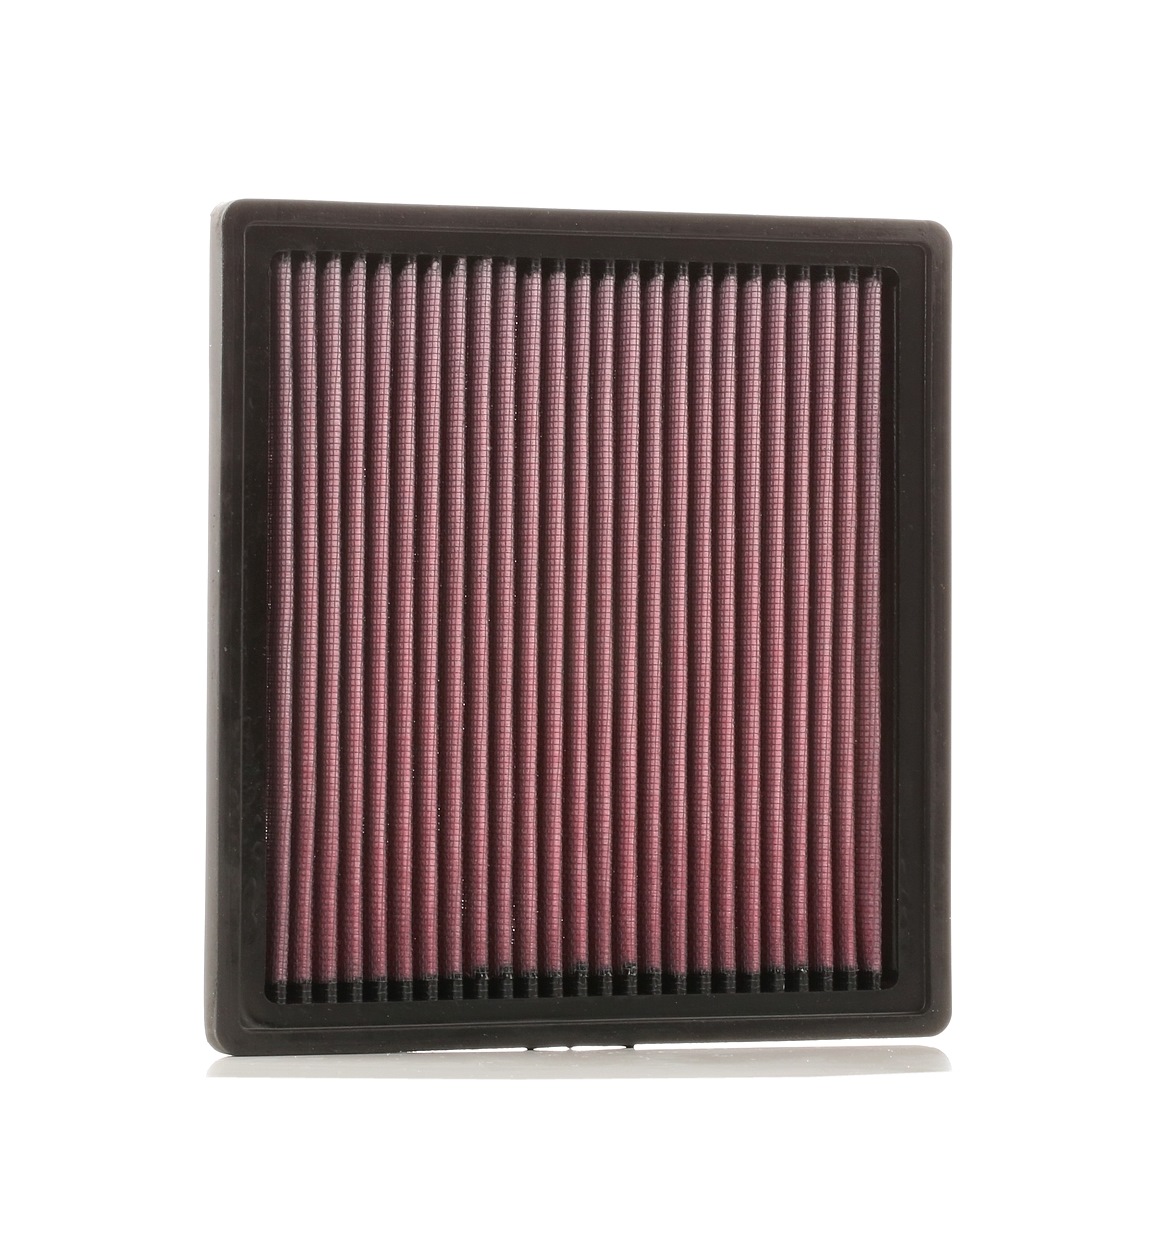 K&N Filters 25mm, 200mm, 210mm, Square, Long-life Filter Length: 210mm, Width: 200mm, Height: 25mm Engine air filter 33-3011 buy